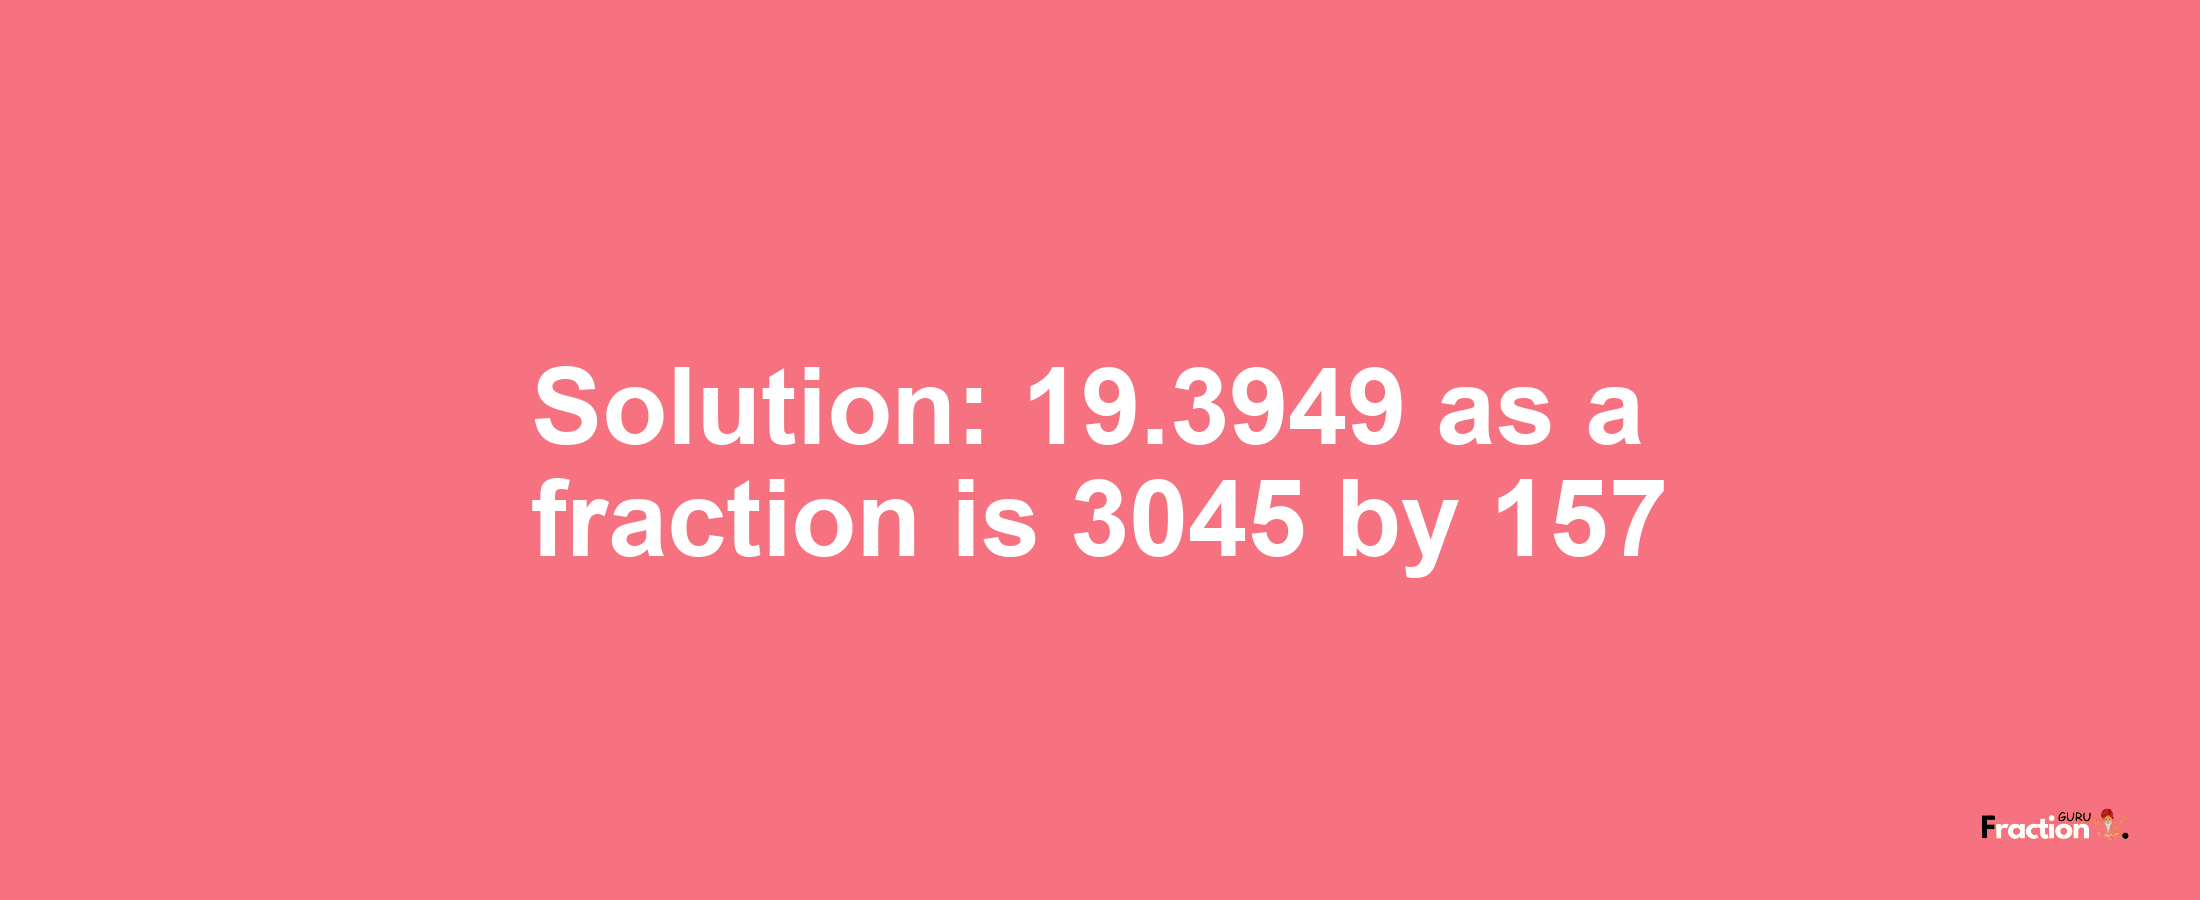 Solution:19.3949 as a fraction is 3045/157